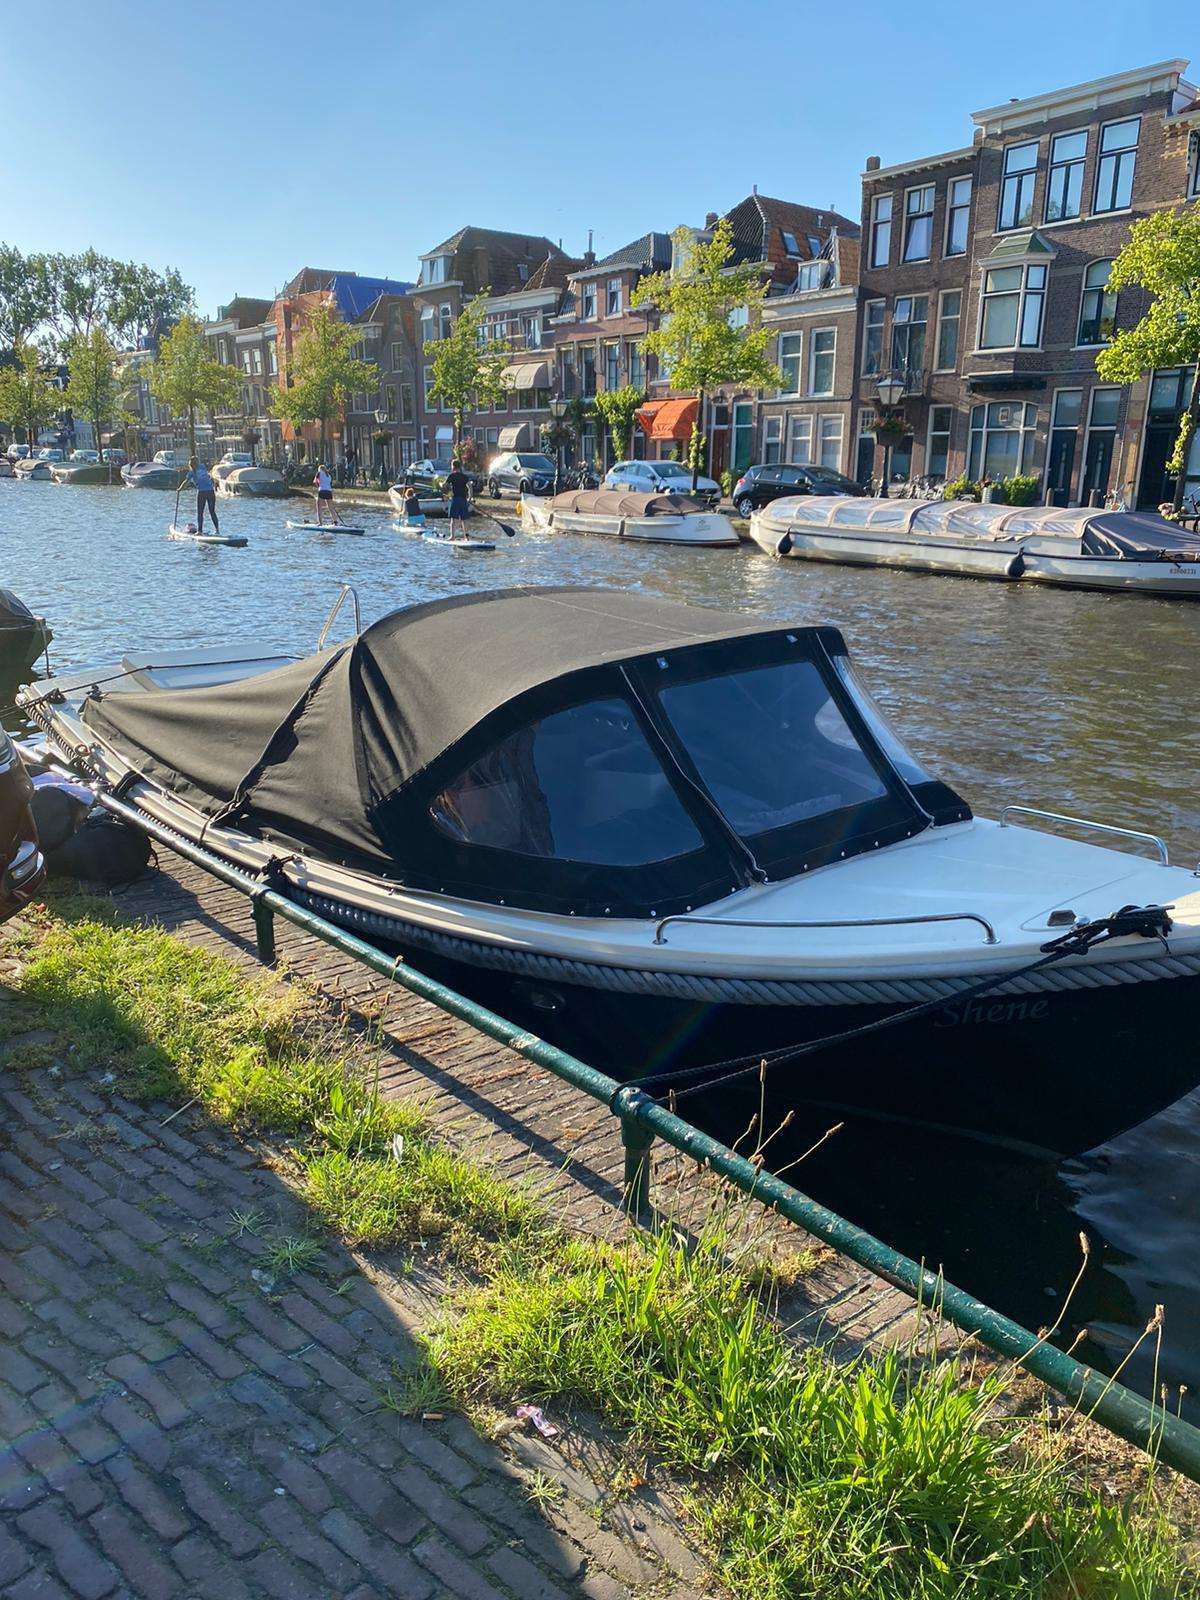 KENZA 710 offers the finest tender come and enjoy the Leiden beauty